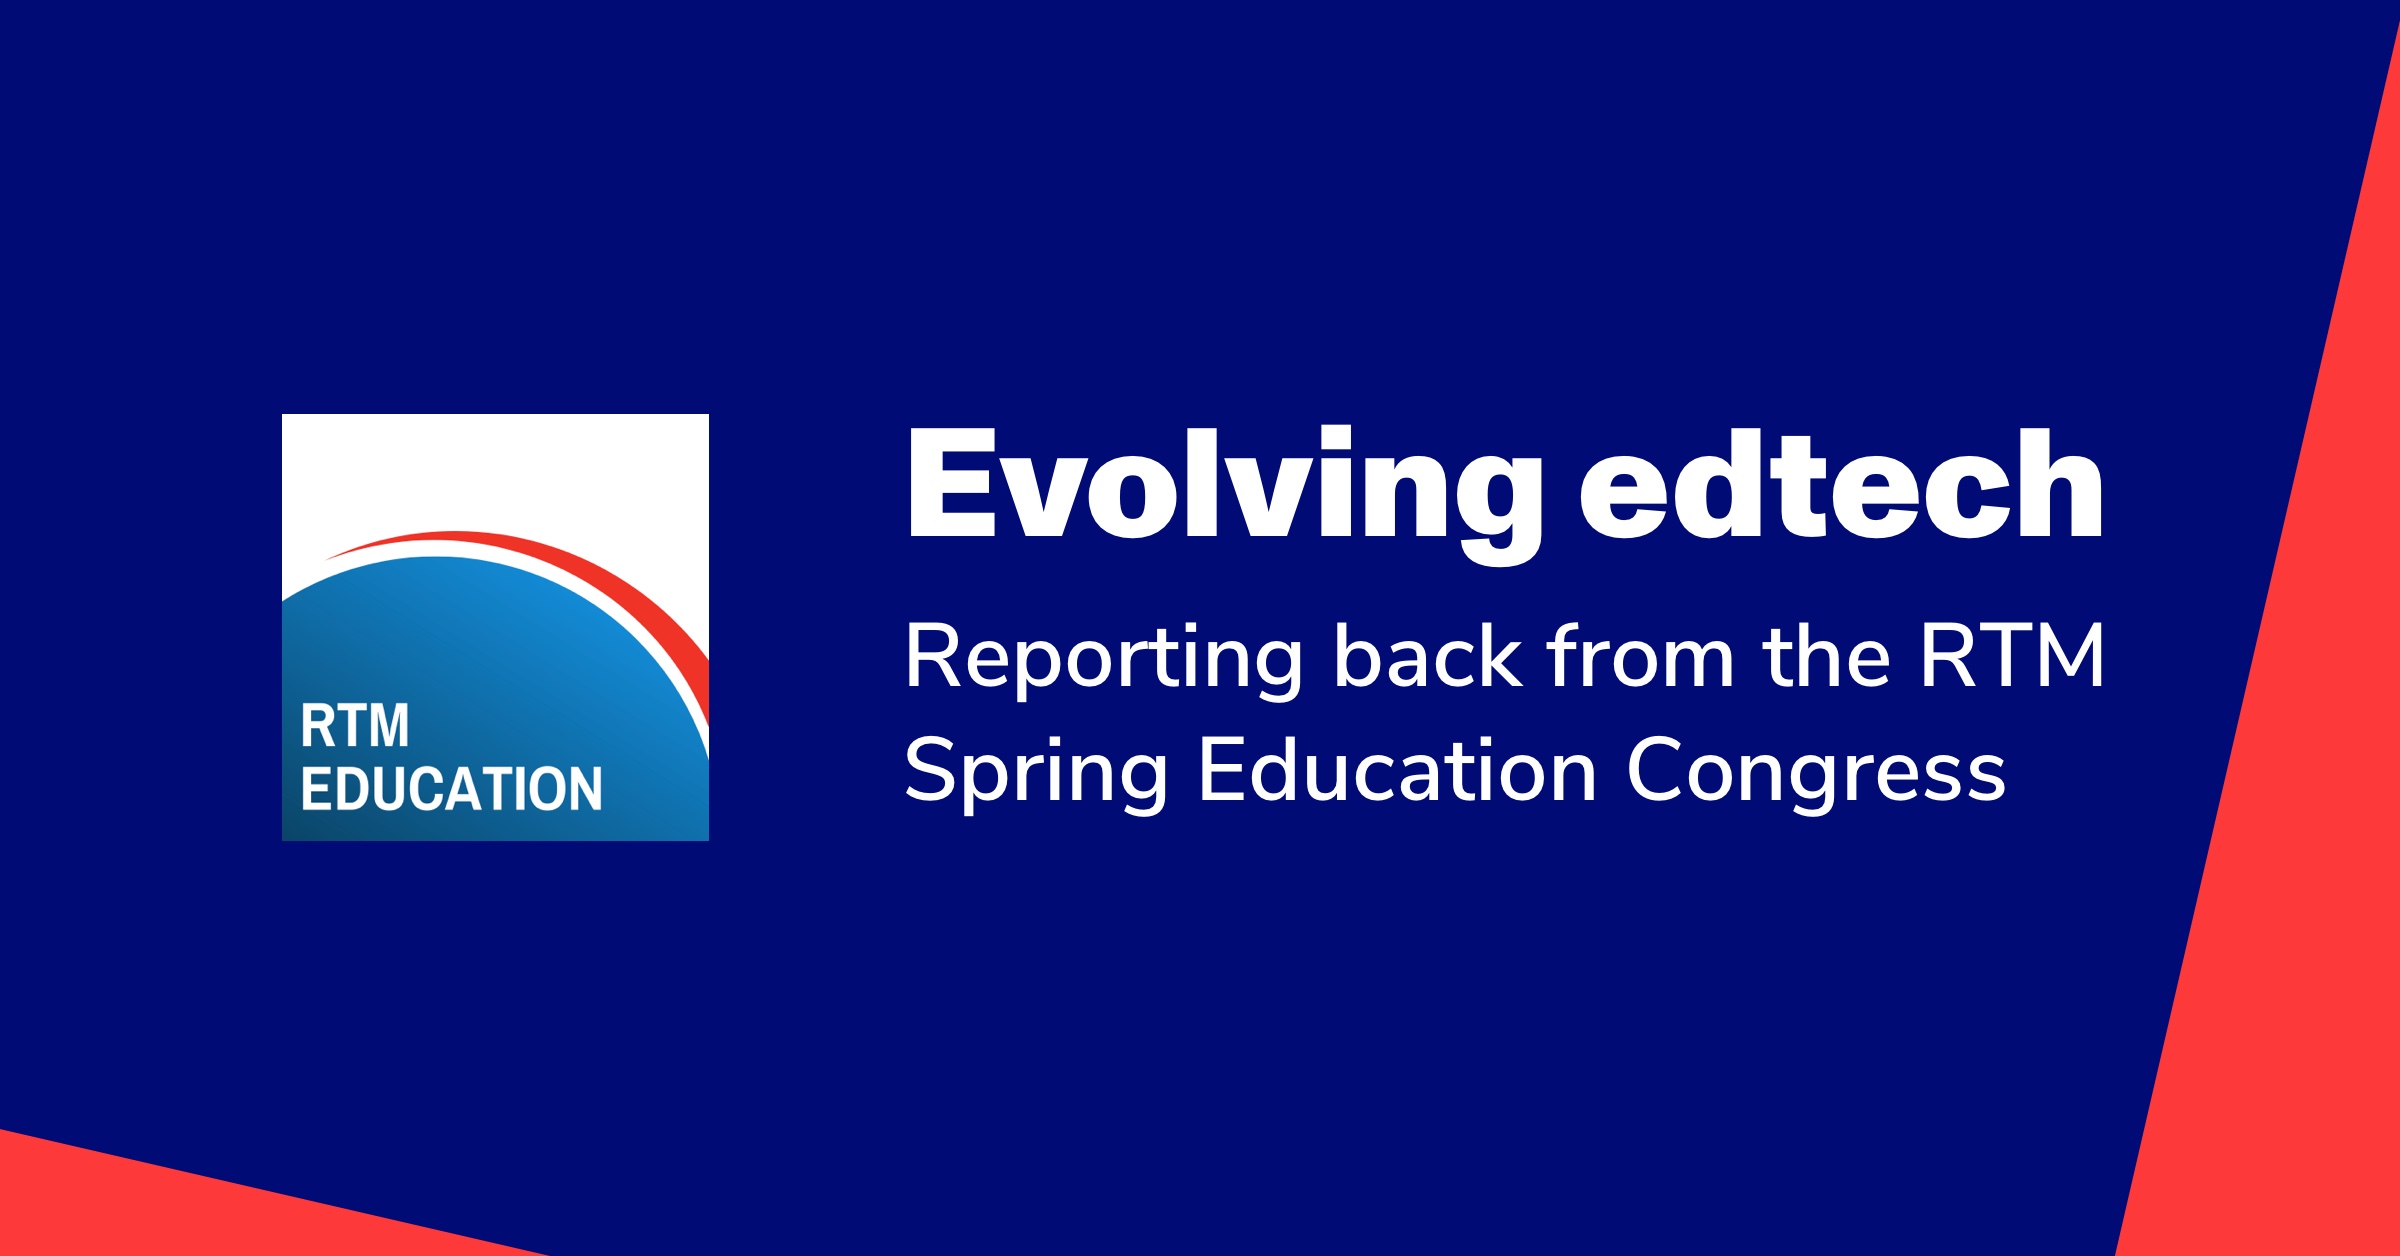 Evolving edtech: Reporting back from the RTM Spring Education Congress